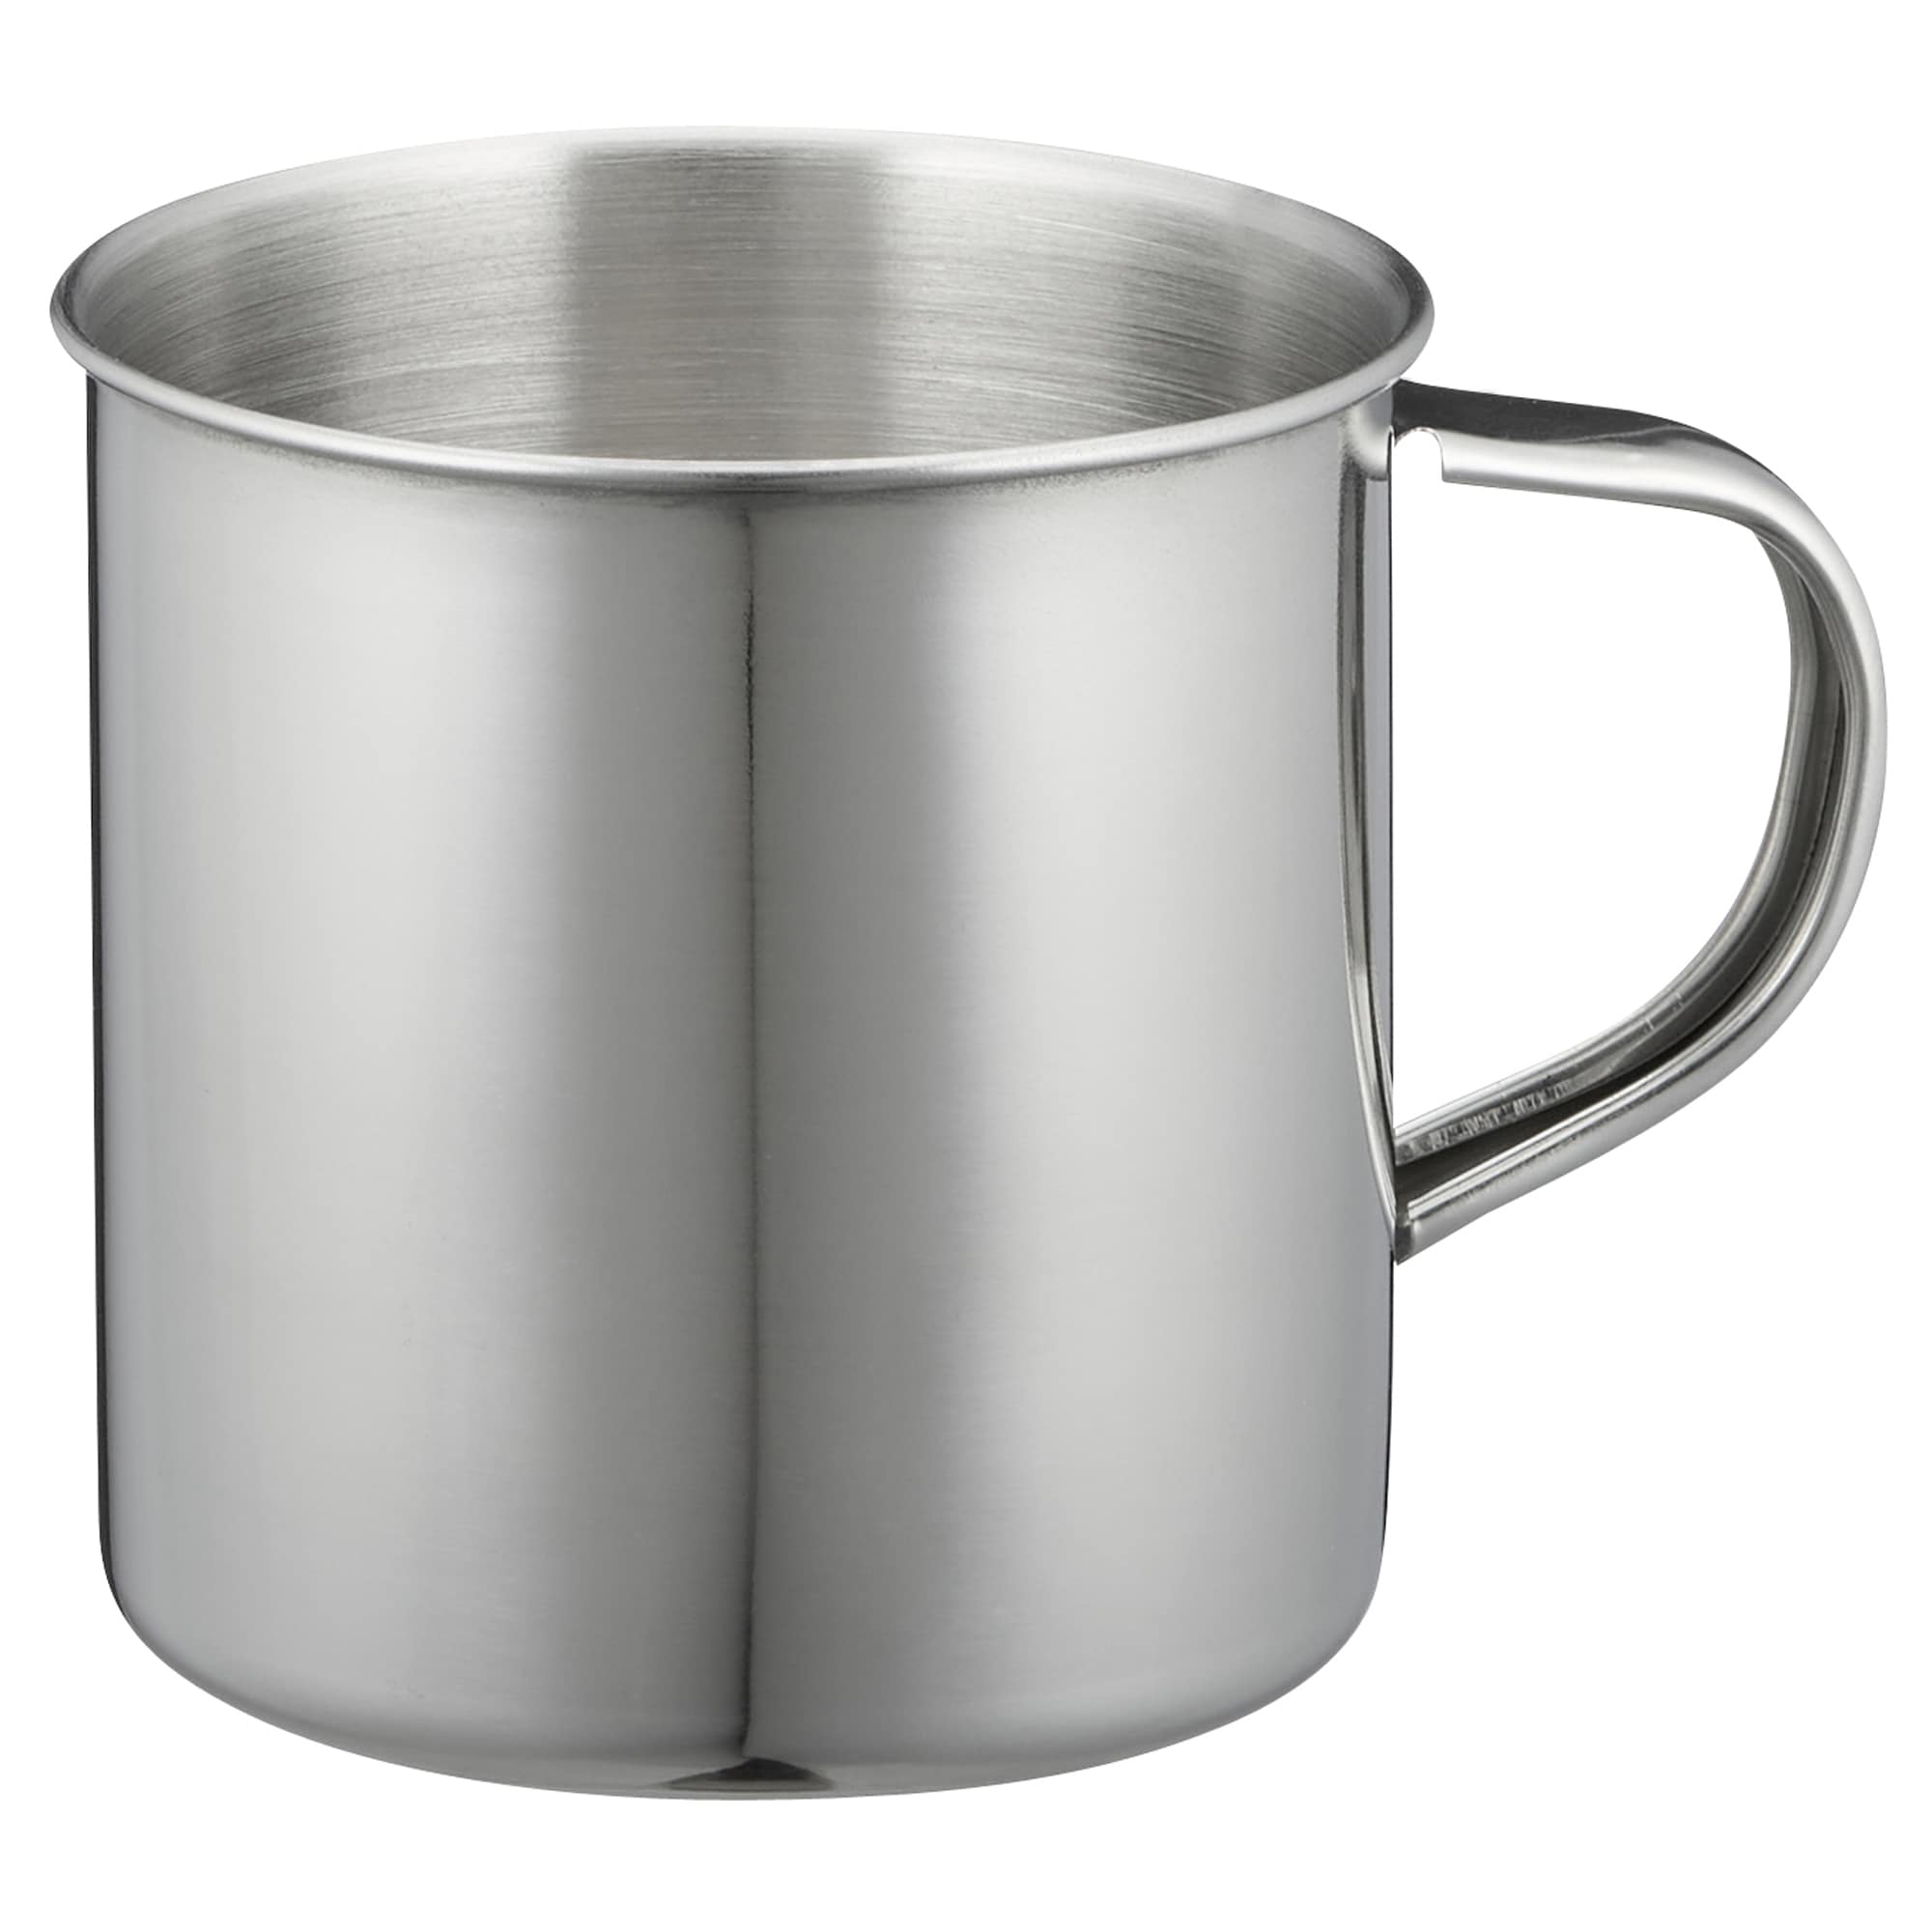 Purchase the Cup Stainless Steel 300 ml by ASMC